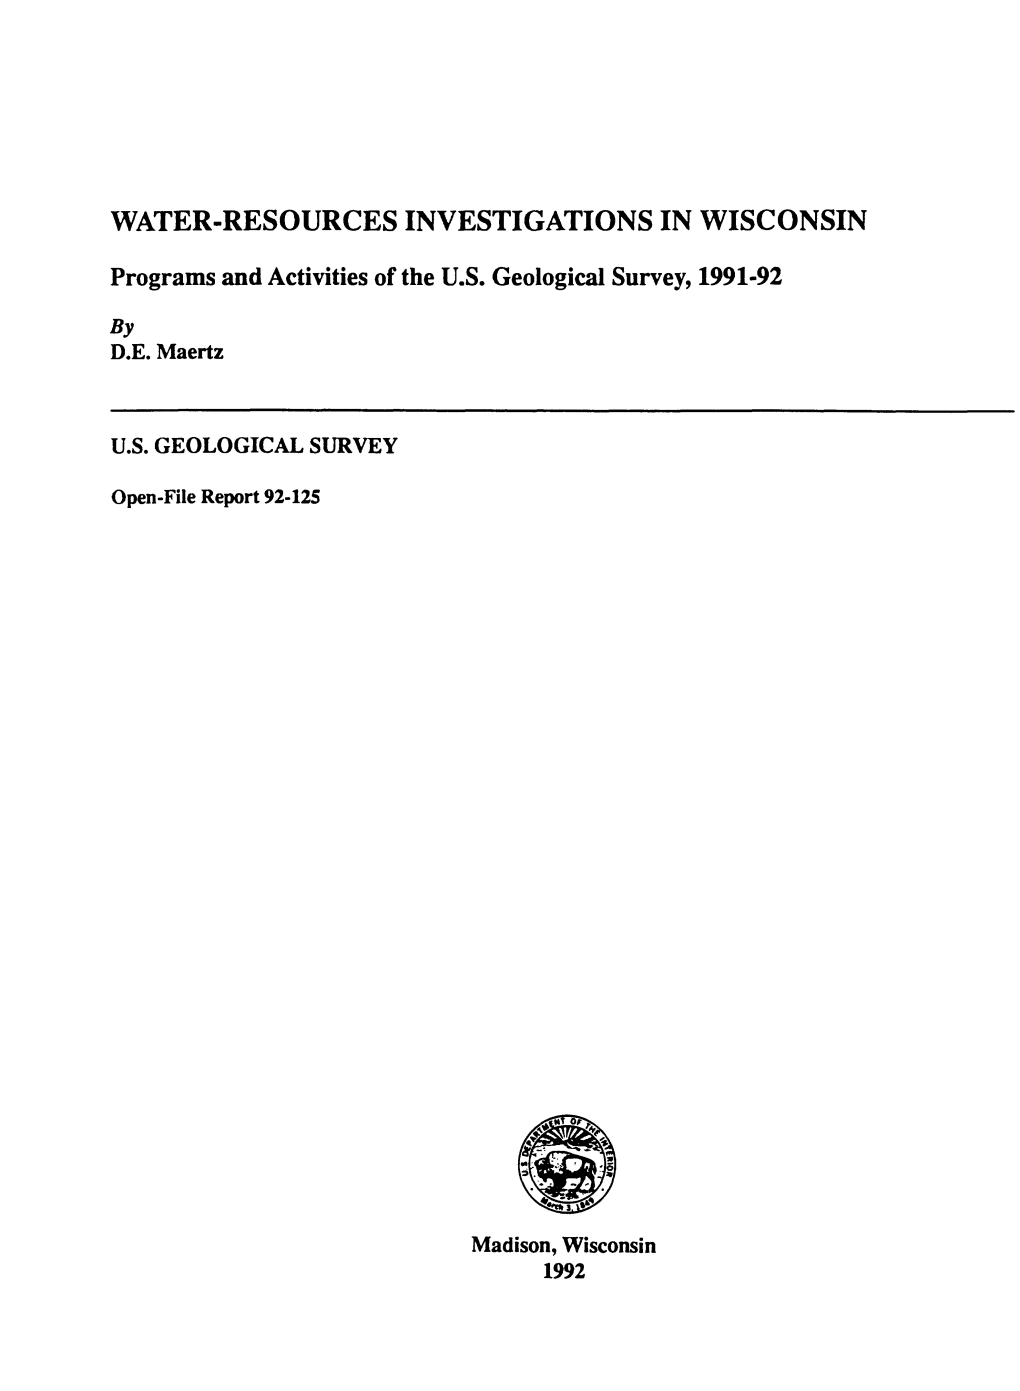 WATER-RESOURCES INVESTIGATIONS in WISCONSIN Programs and Activities of the U.S